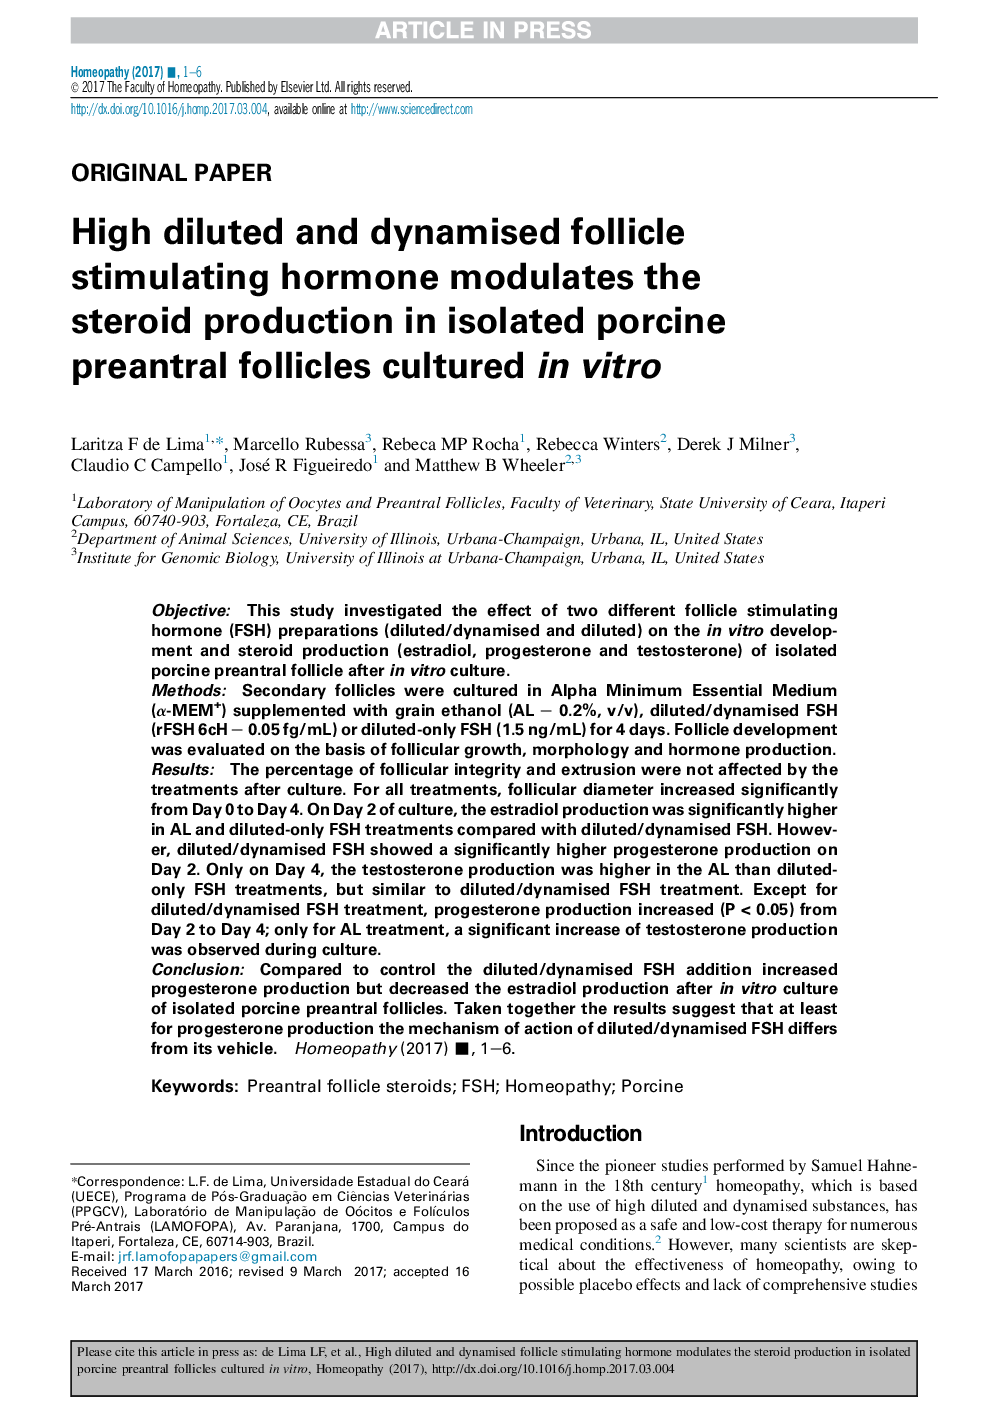 High diluted and dynamised follicle stimulating hormone modulates steroid production in isolated porcine preantral follicles cultured inÂ vitro